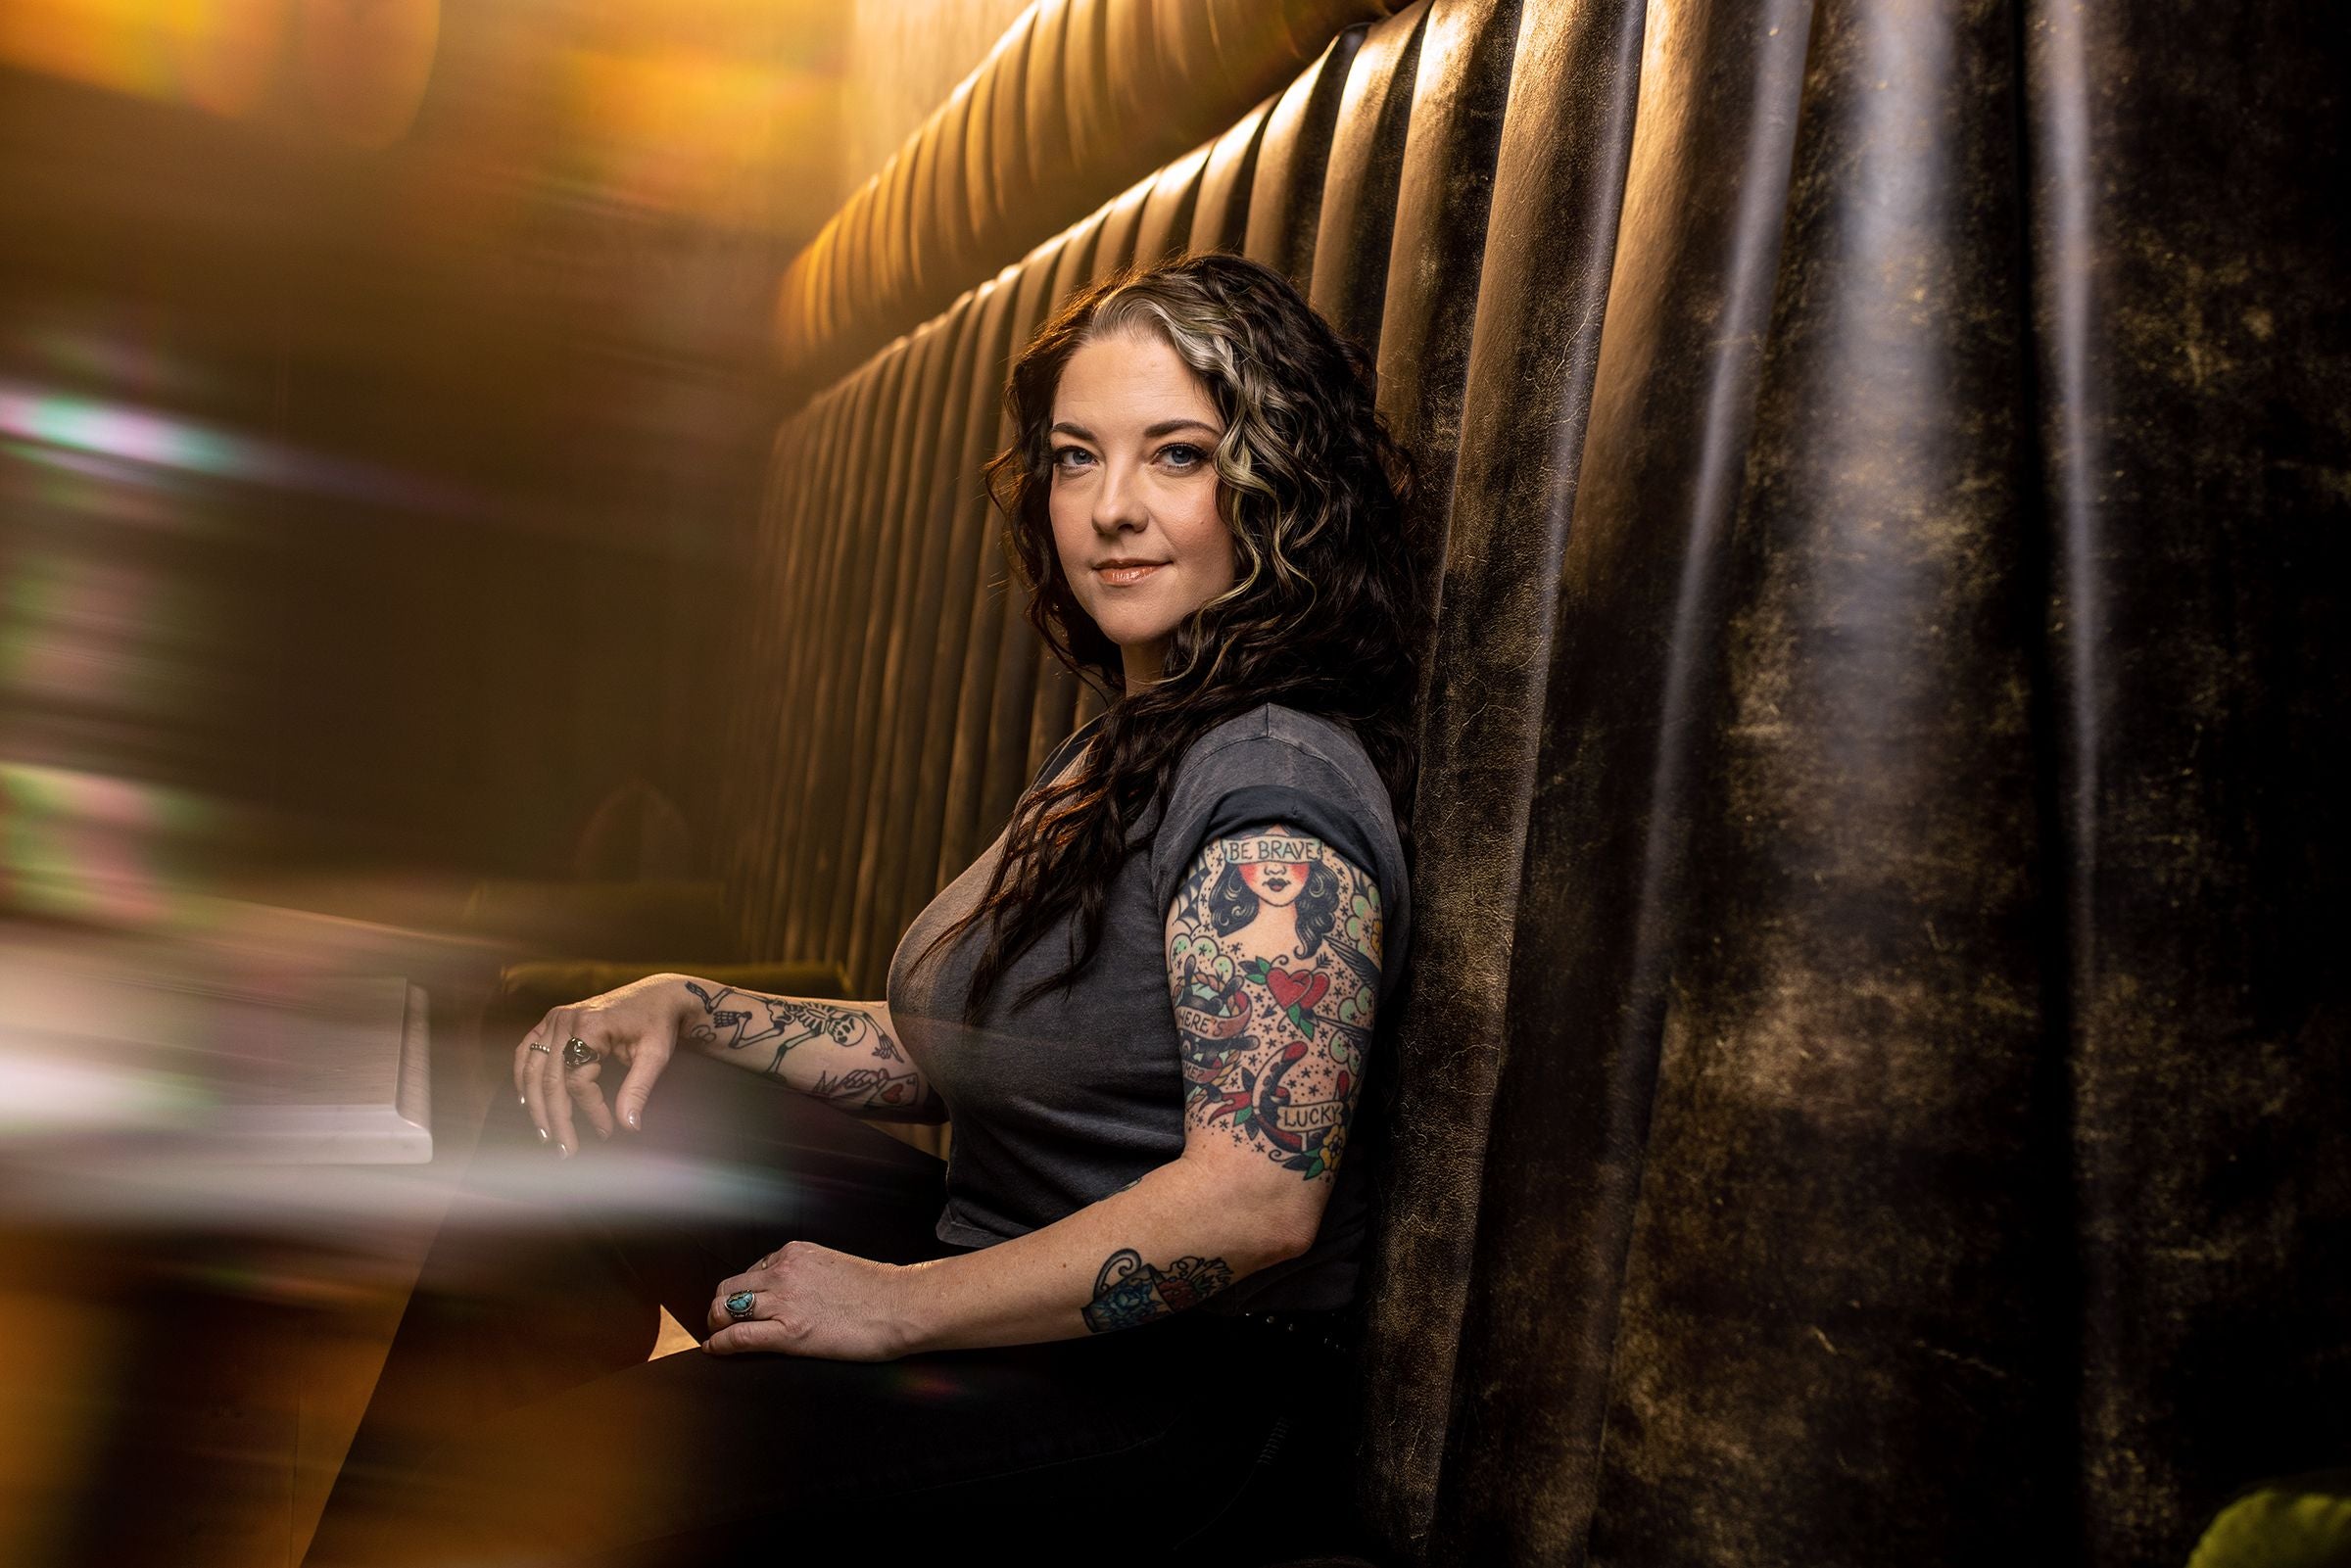 Main image for event titled Ashley McBryde: The Devil I Know Tour